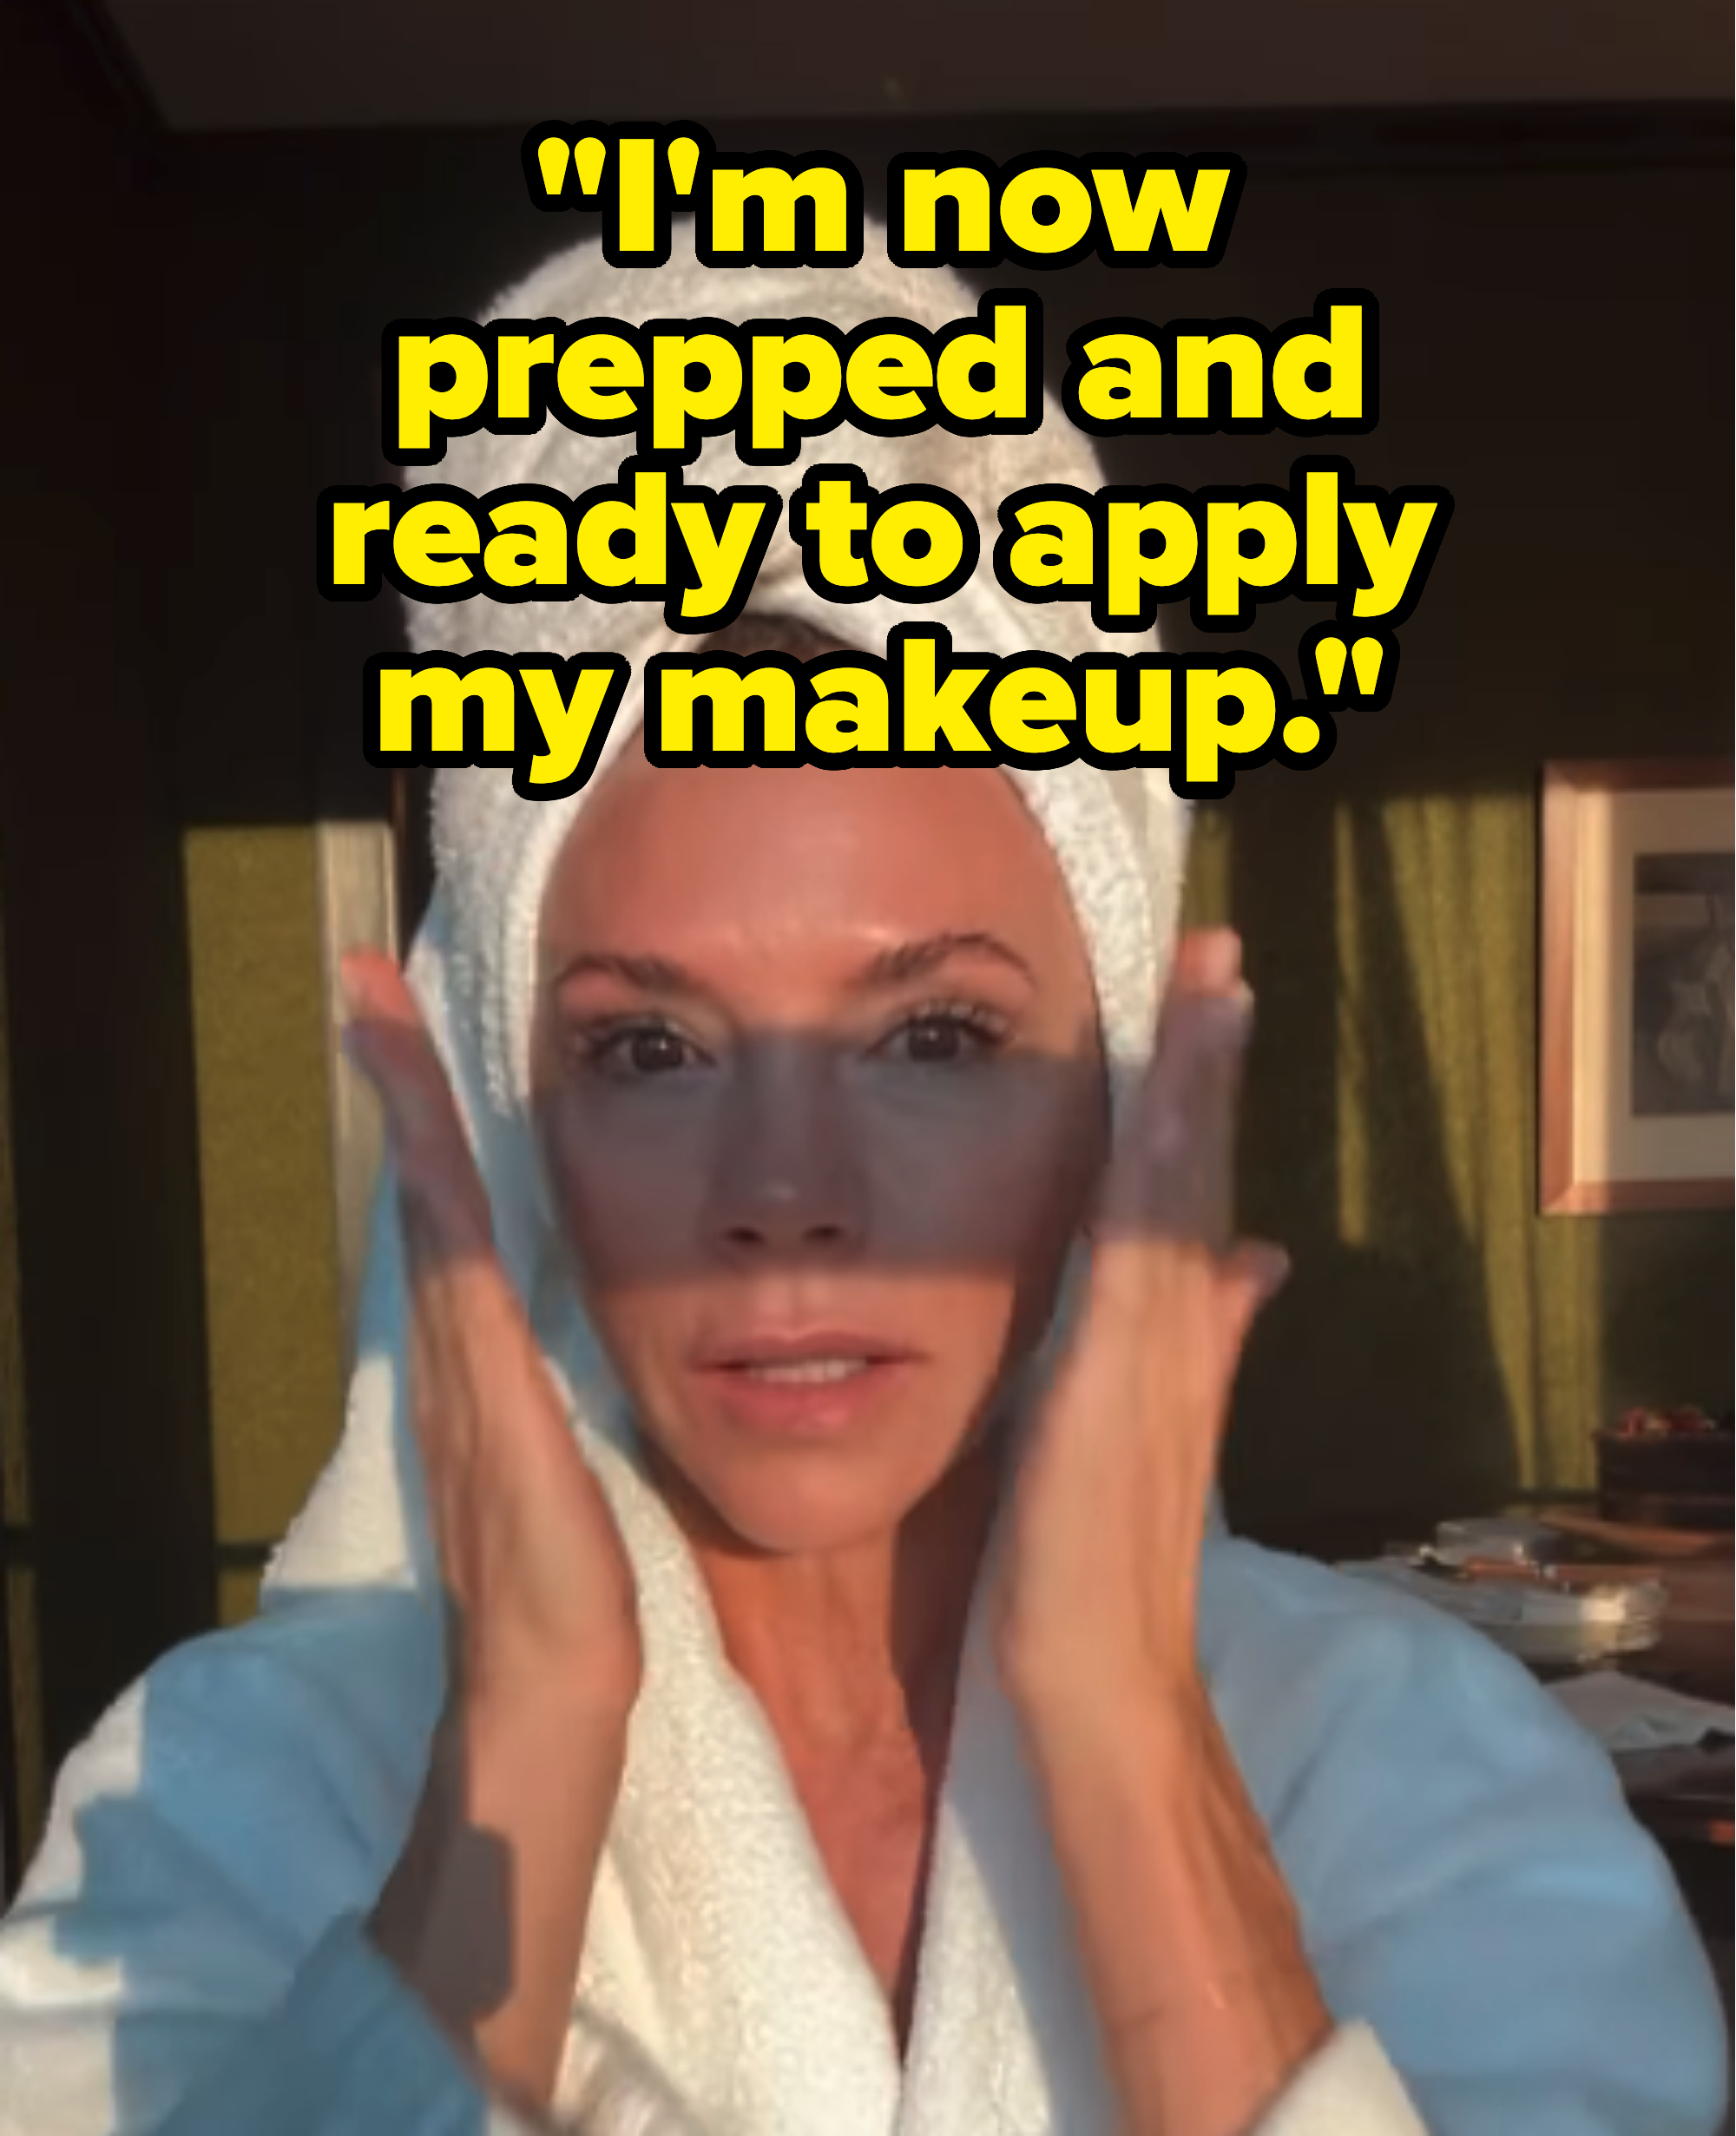 &quot;I&#x27;m now prepped and ready to apply my makeup&quot;